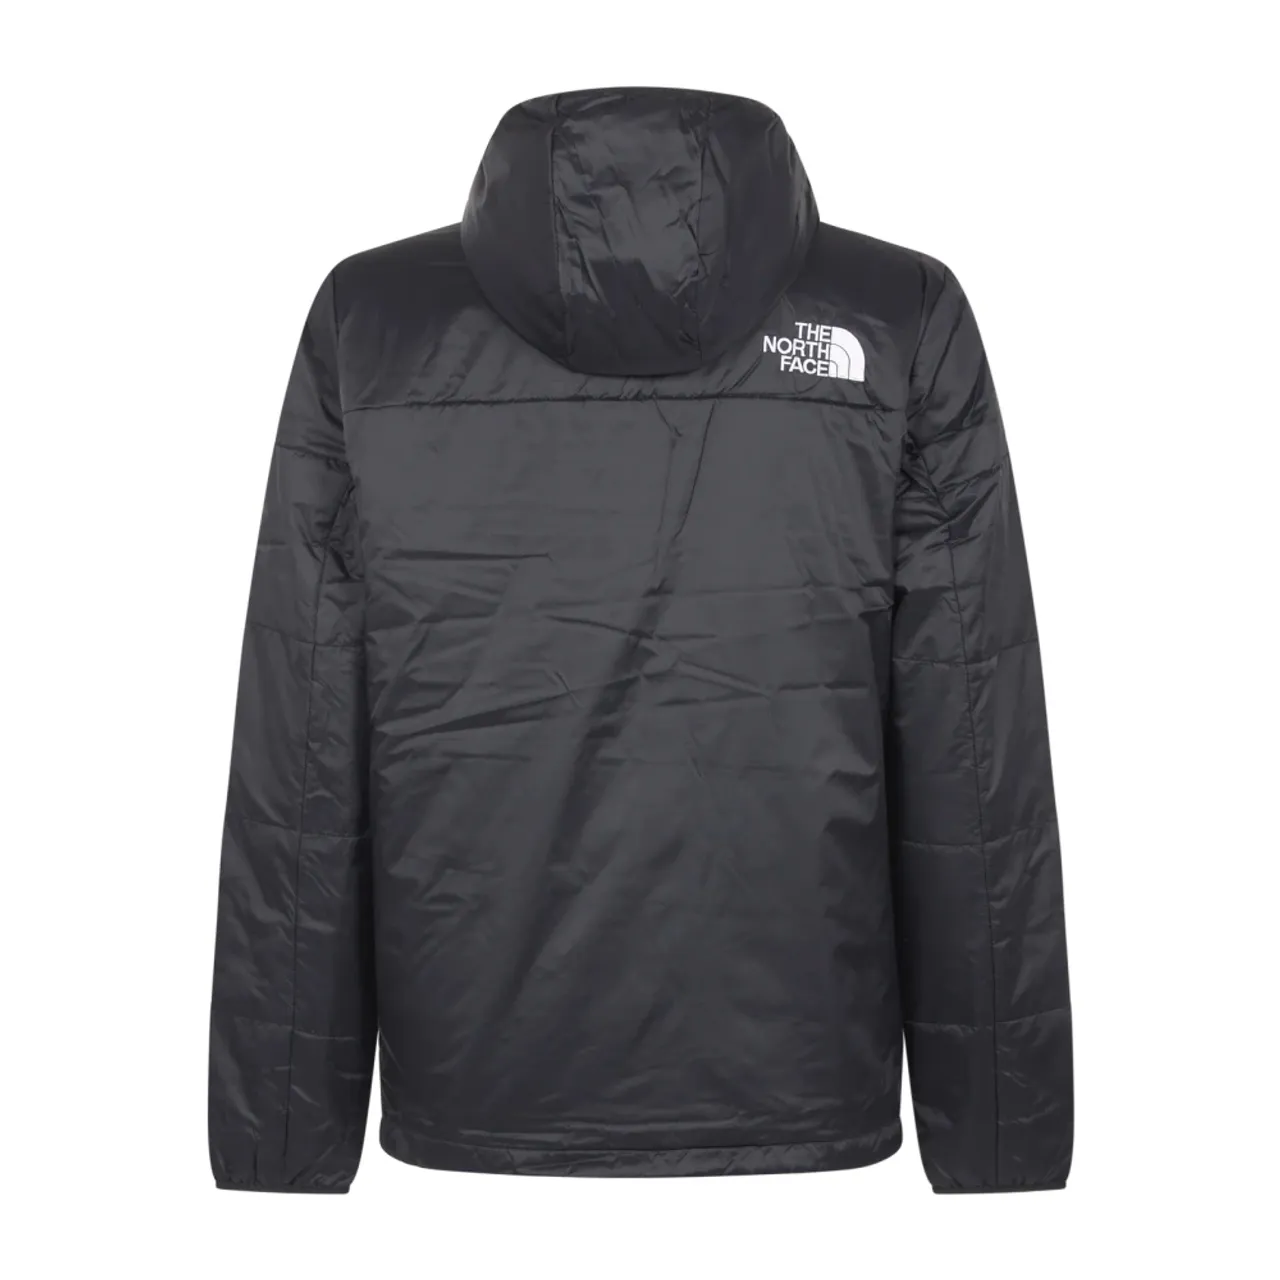 The North Face , Black Jackets - Himalayan Light Synth Hoodie ,Black male, Sizes: